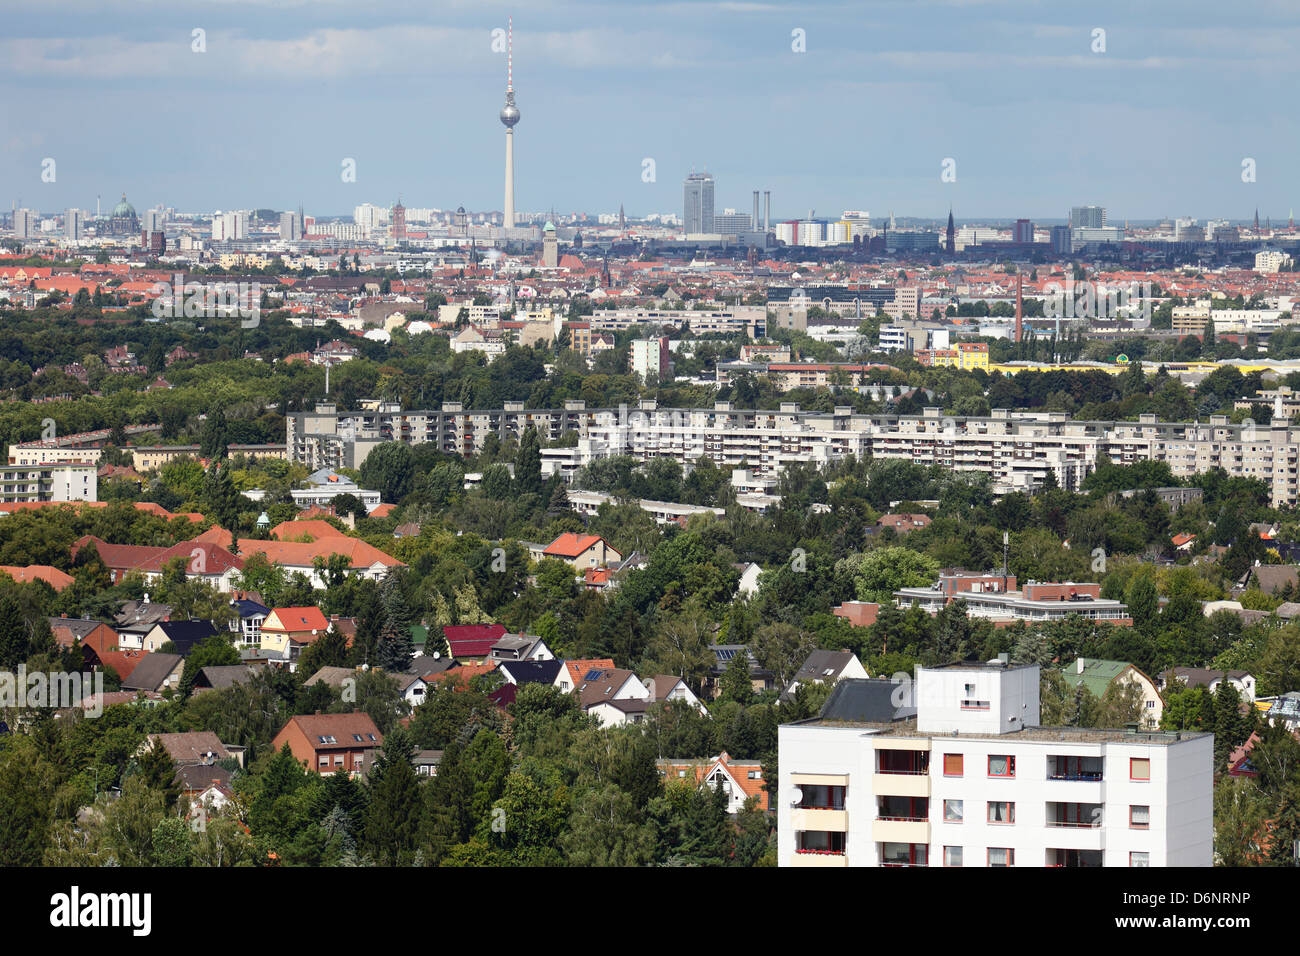 Berlin, Germany, Gropius City, the south of Berlin and the skyline of Berlin Mitte Stock Photo